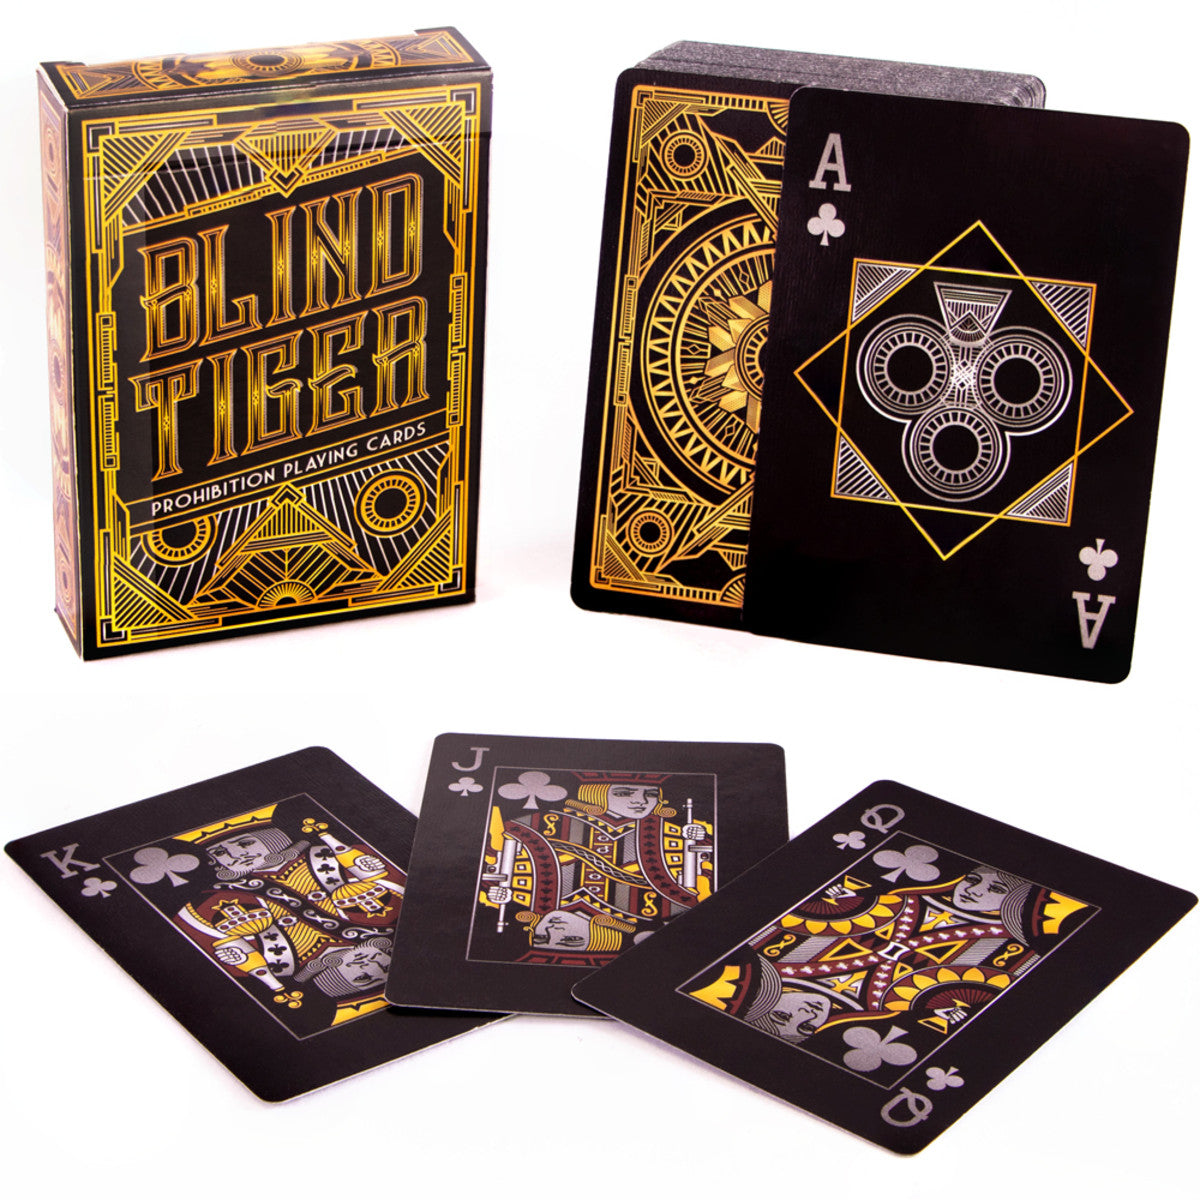 Blind Tiger Prohibition Playing - Classic - Game On